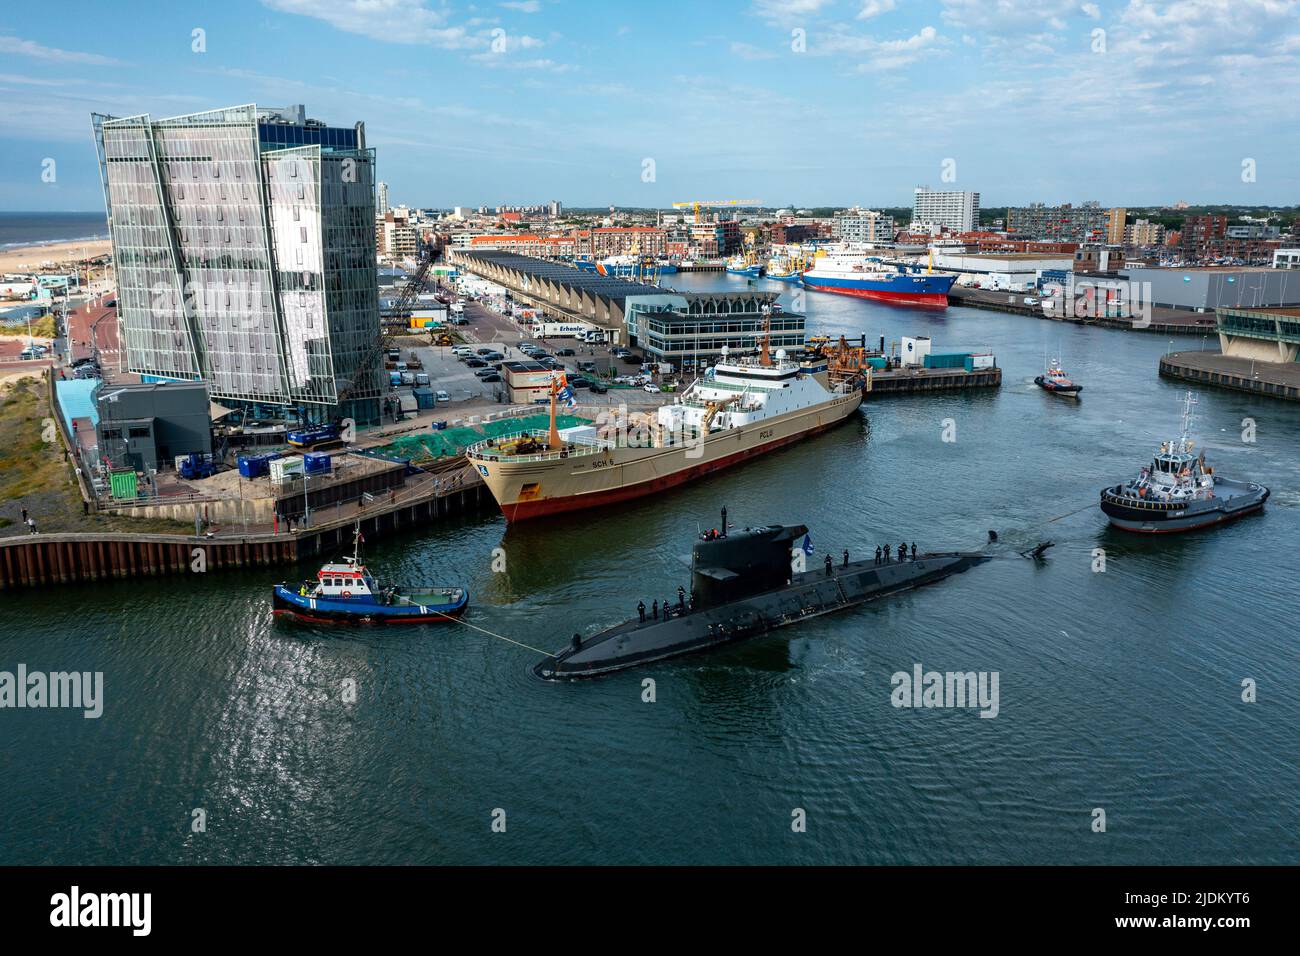 Aerial view of Zr. Ms.Zeeleeuw submarine leaving Scheveningen Harbor, escorted by a navy tugboat, pilot boat & lifeboat, South Hollands, Netherlands. Stock Photo